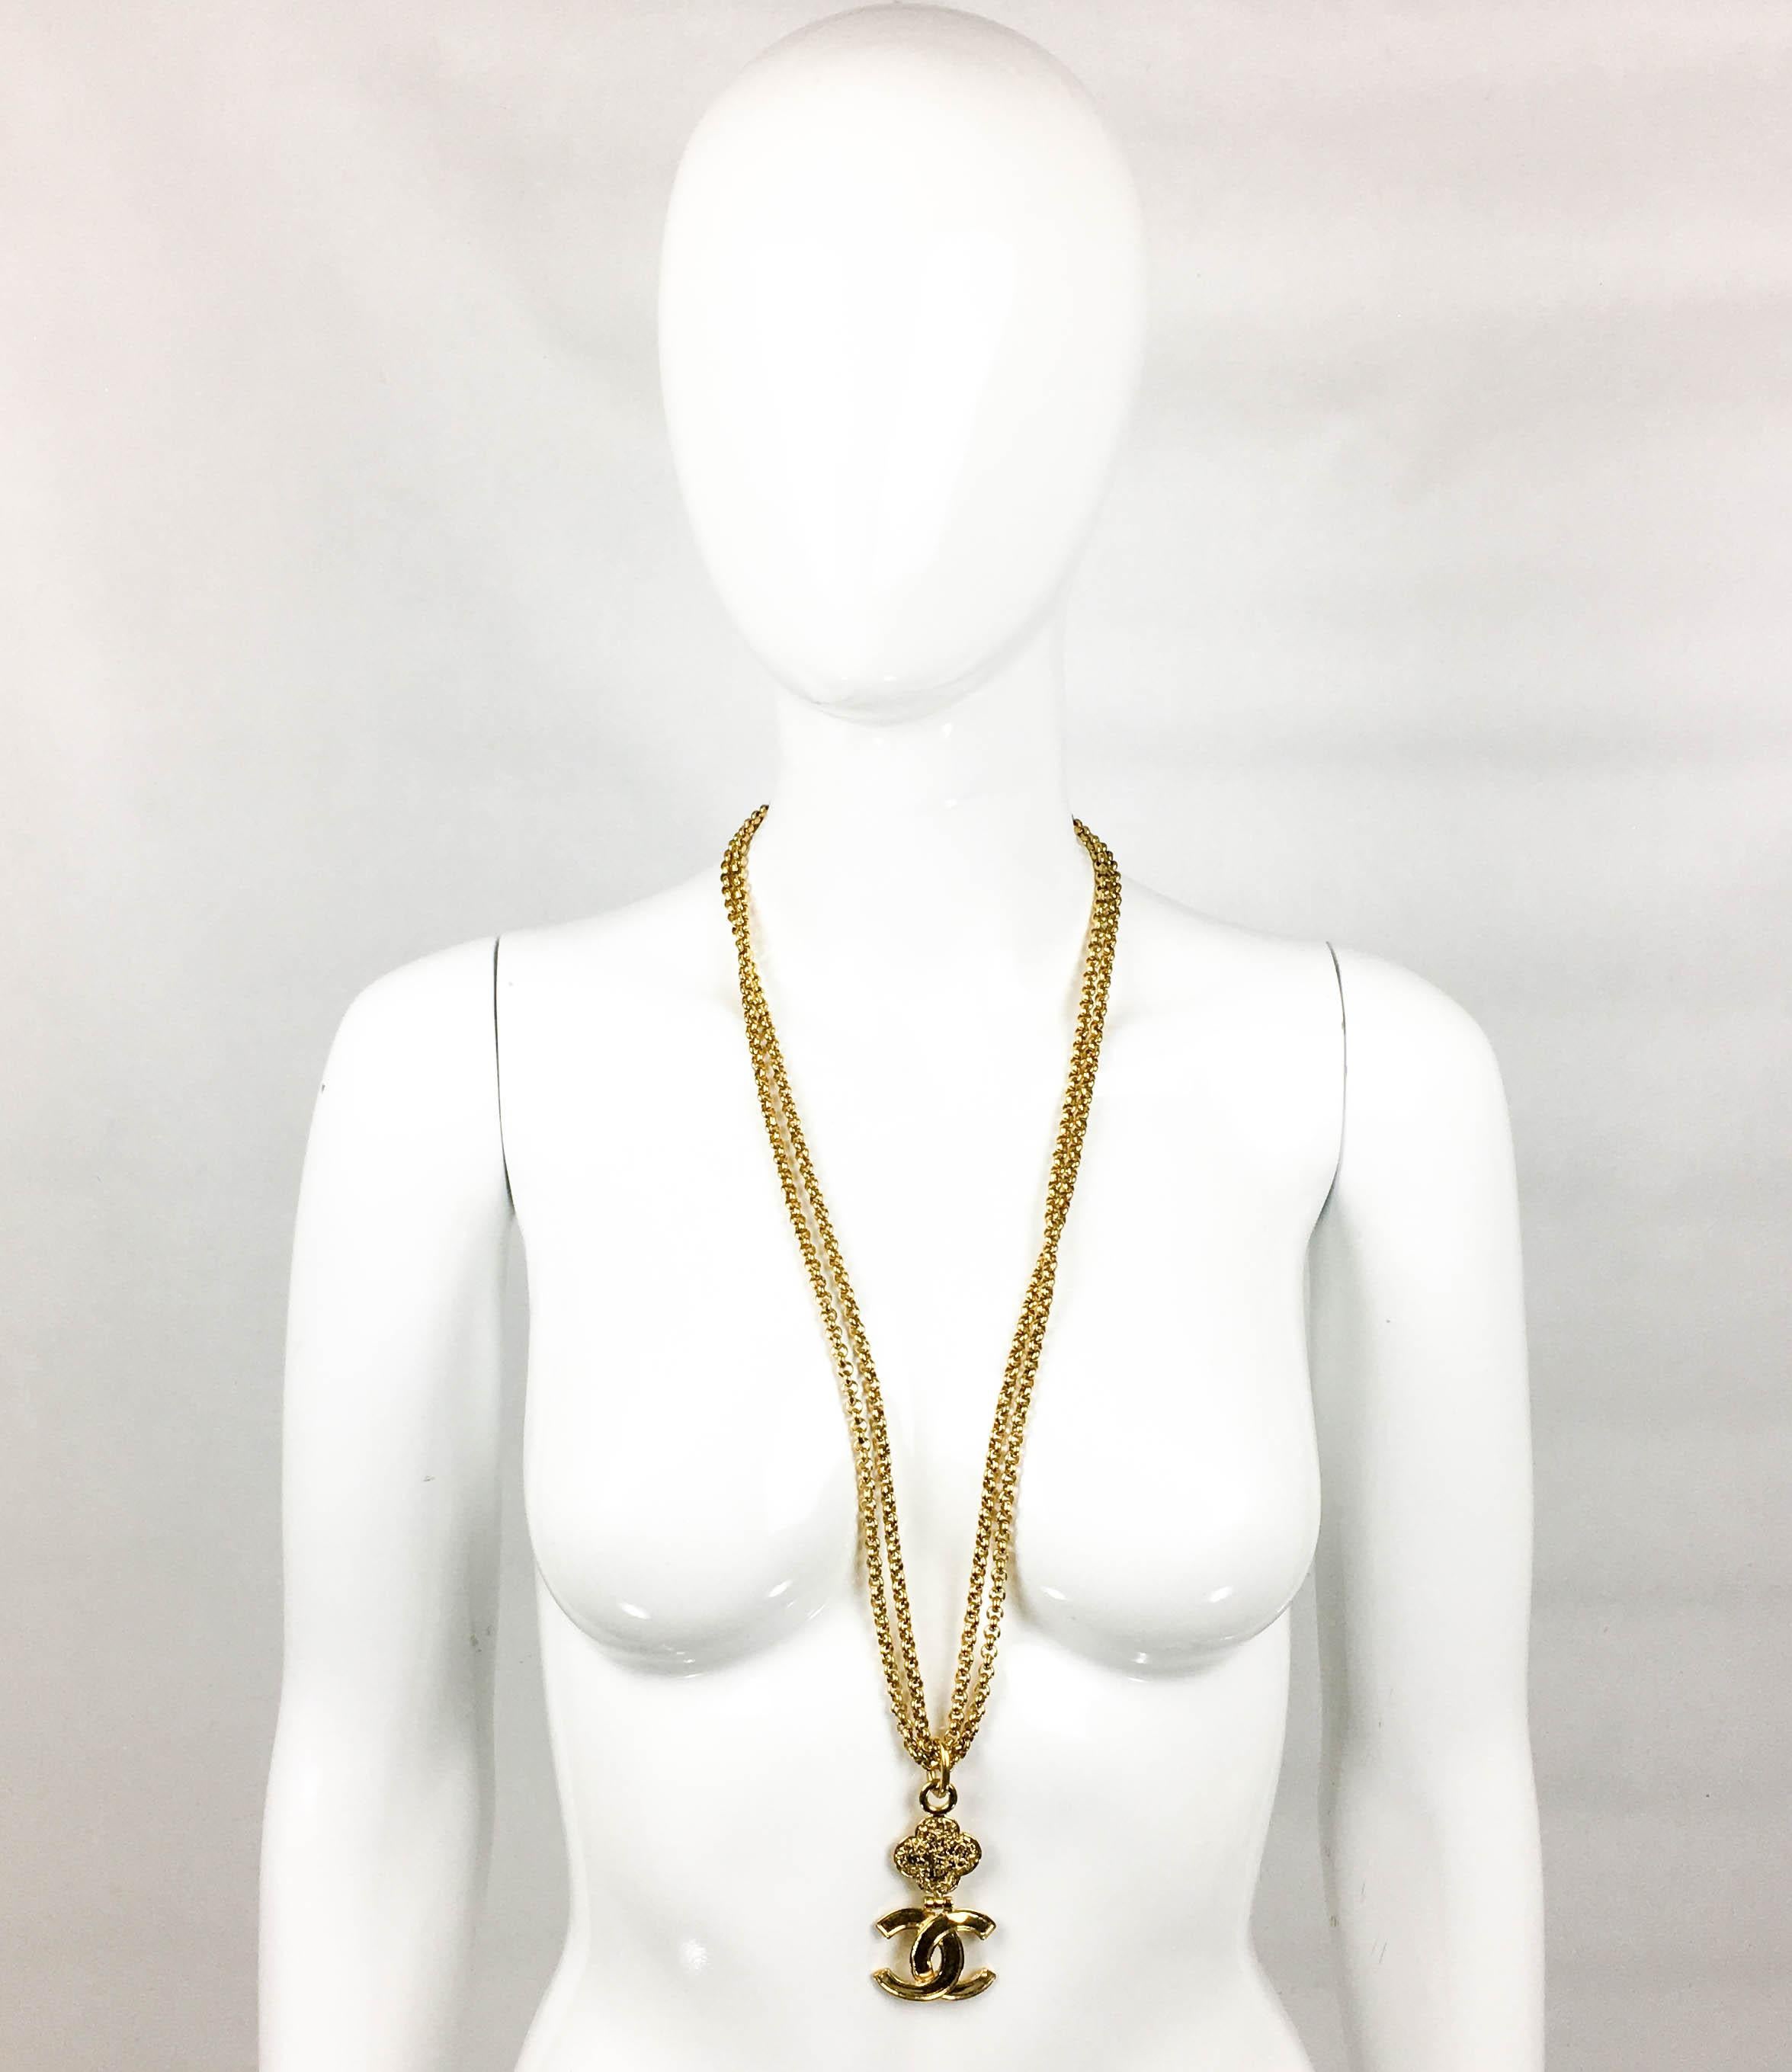 Vintage Chanel Gilt Logo Pendant Necklace. This gorgeous Chanel necklace was created for the 1995 Autumn / Winter Collection. Comprising of a long double chain and the iconic ‘CC’ logo as a pendant, it can also be worn doubled up. Chanel signed on